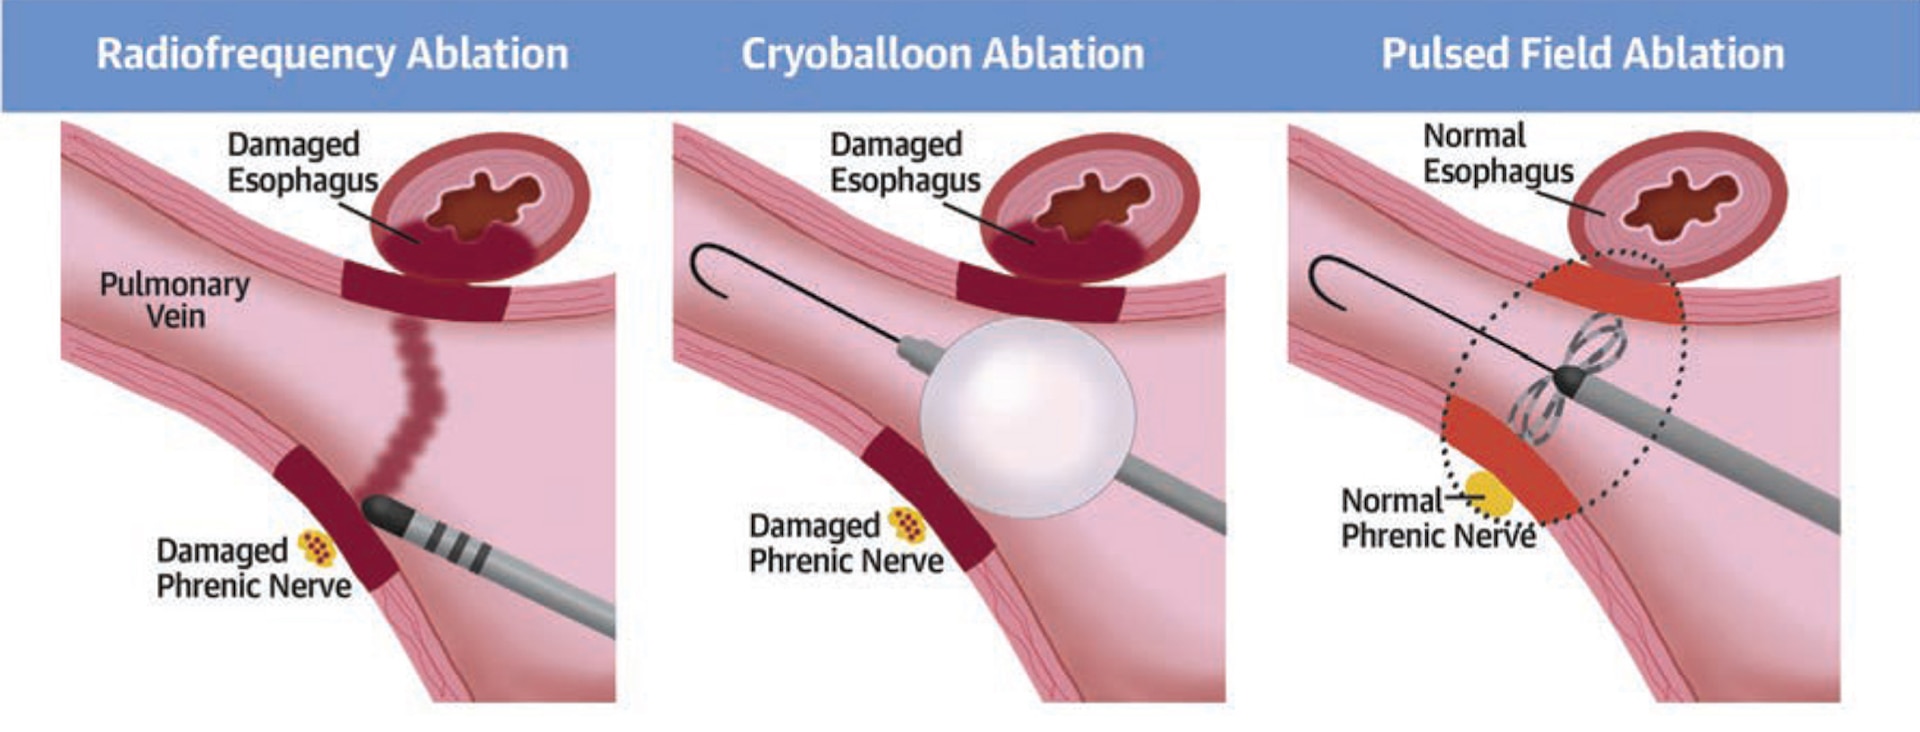 An illustration shows safety concerns with radiofrequency ablation versus cyroballoon ablation versus pulsed field ablation.